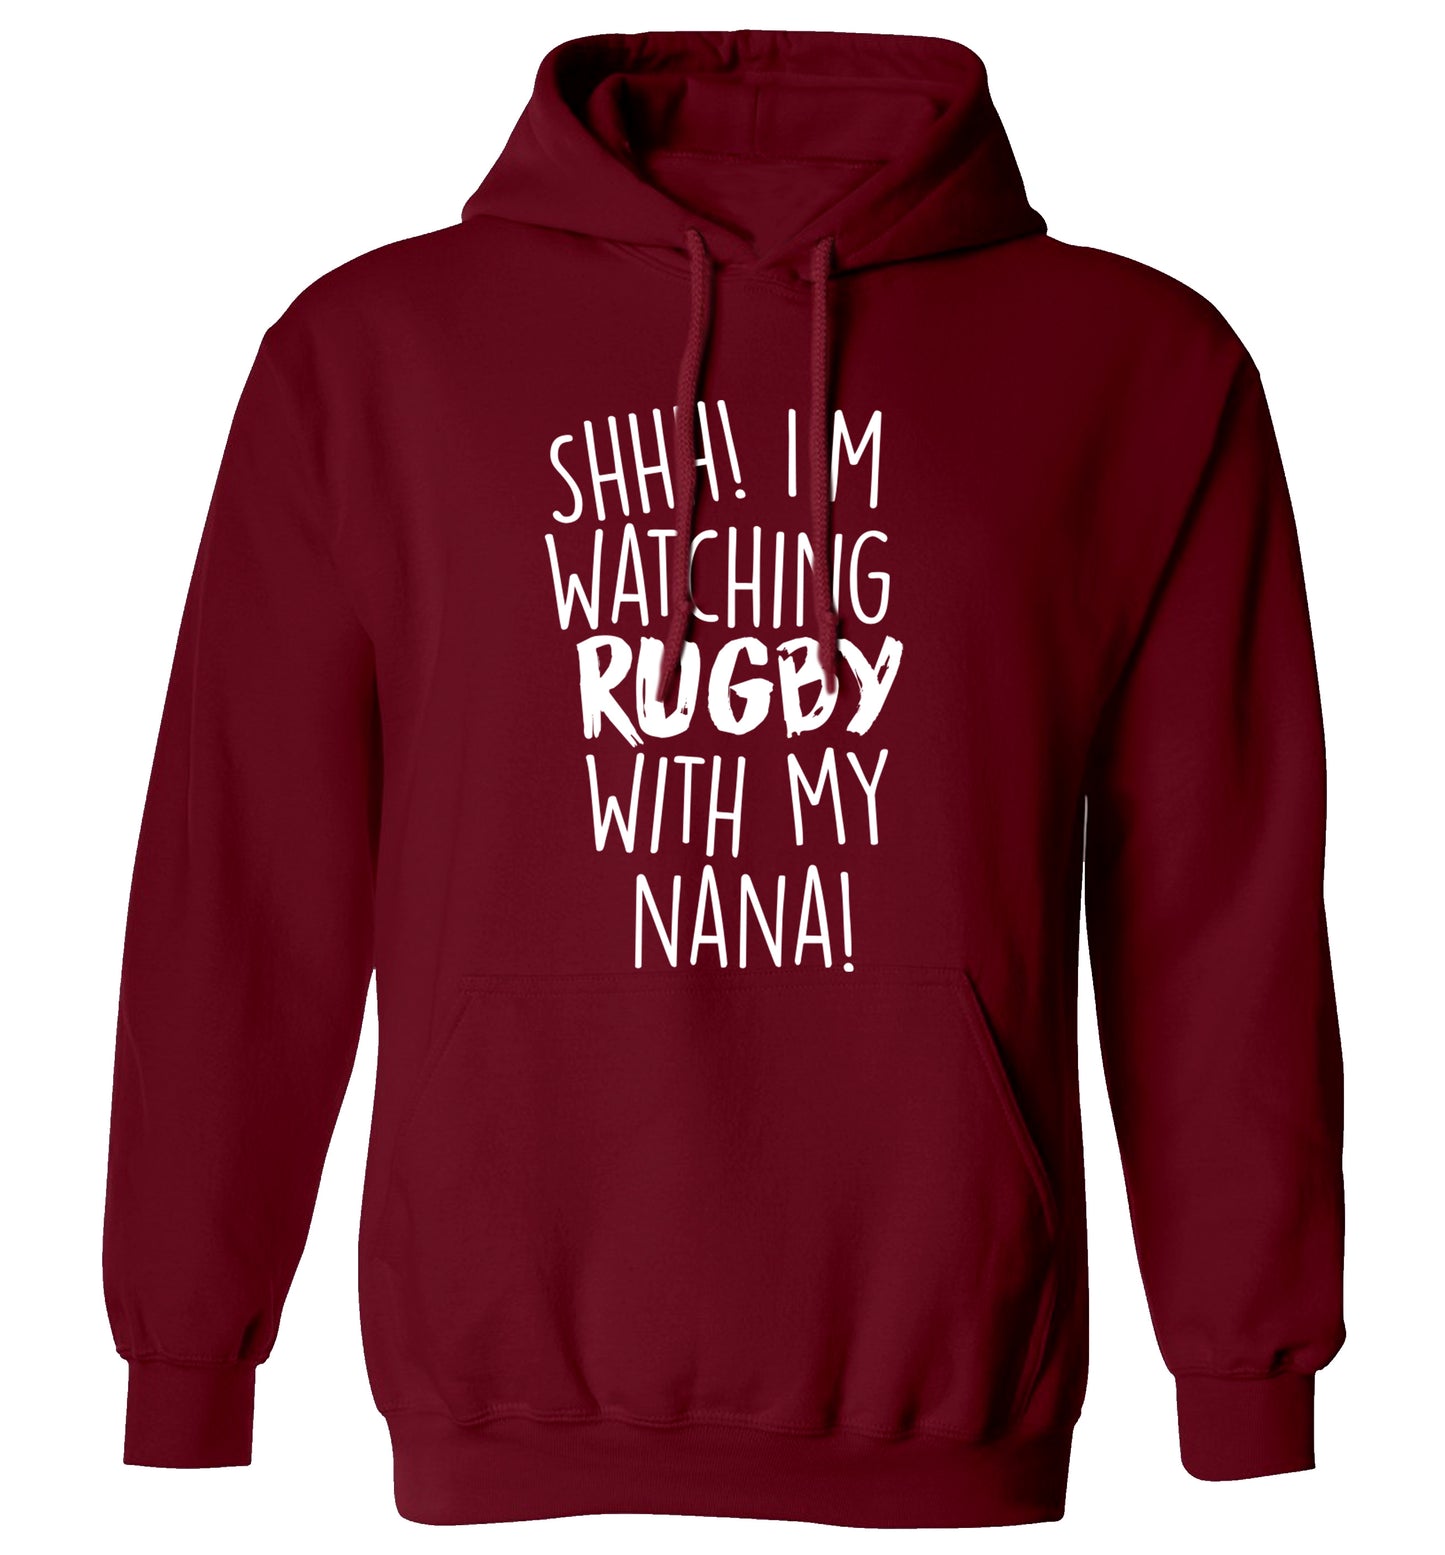 Shh I'm watching rugby with my nana adults unisex maroon hoodie 2XL